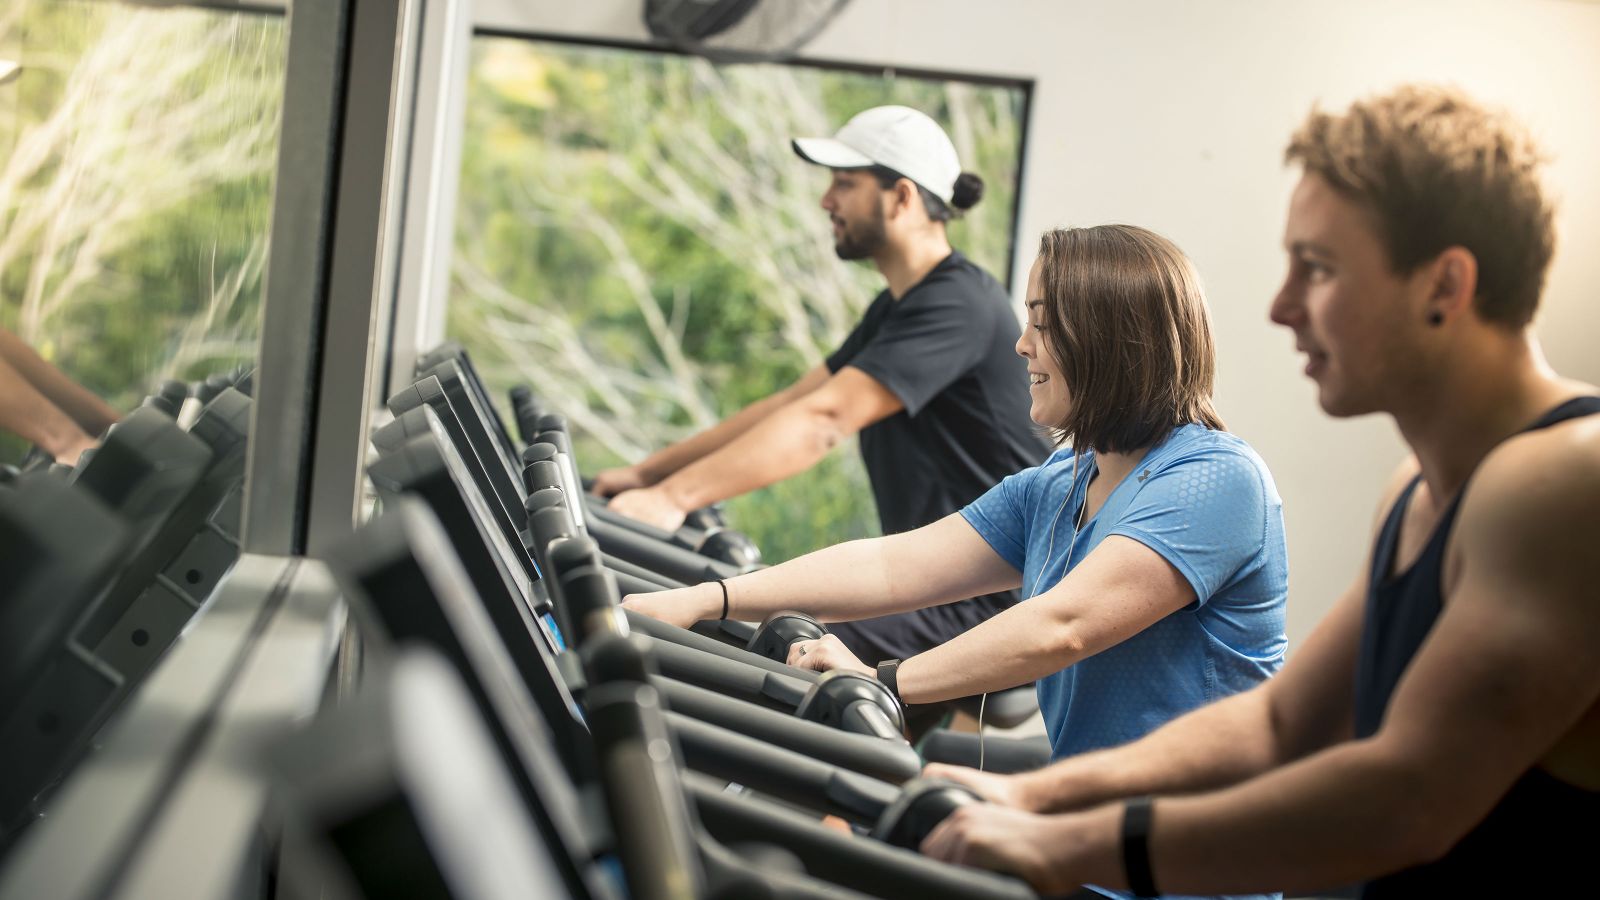 Two men and a woman working out on exercise machines.